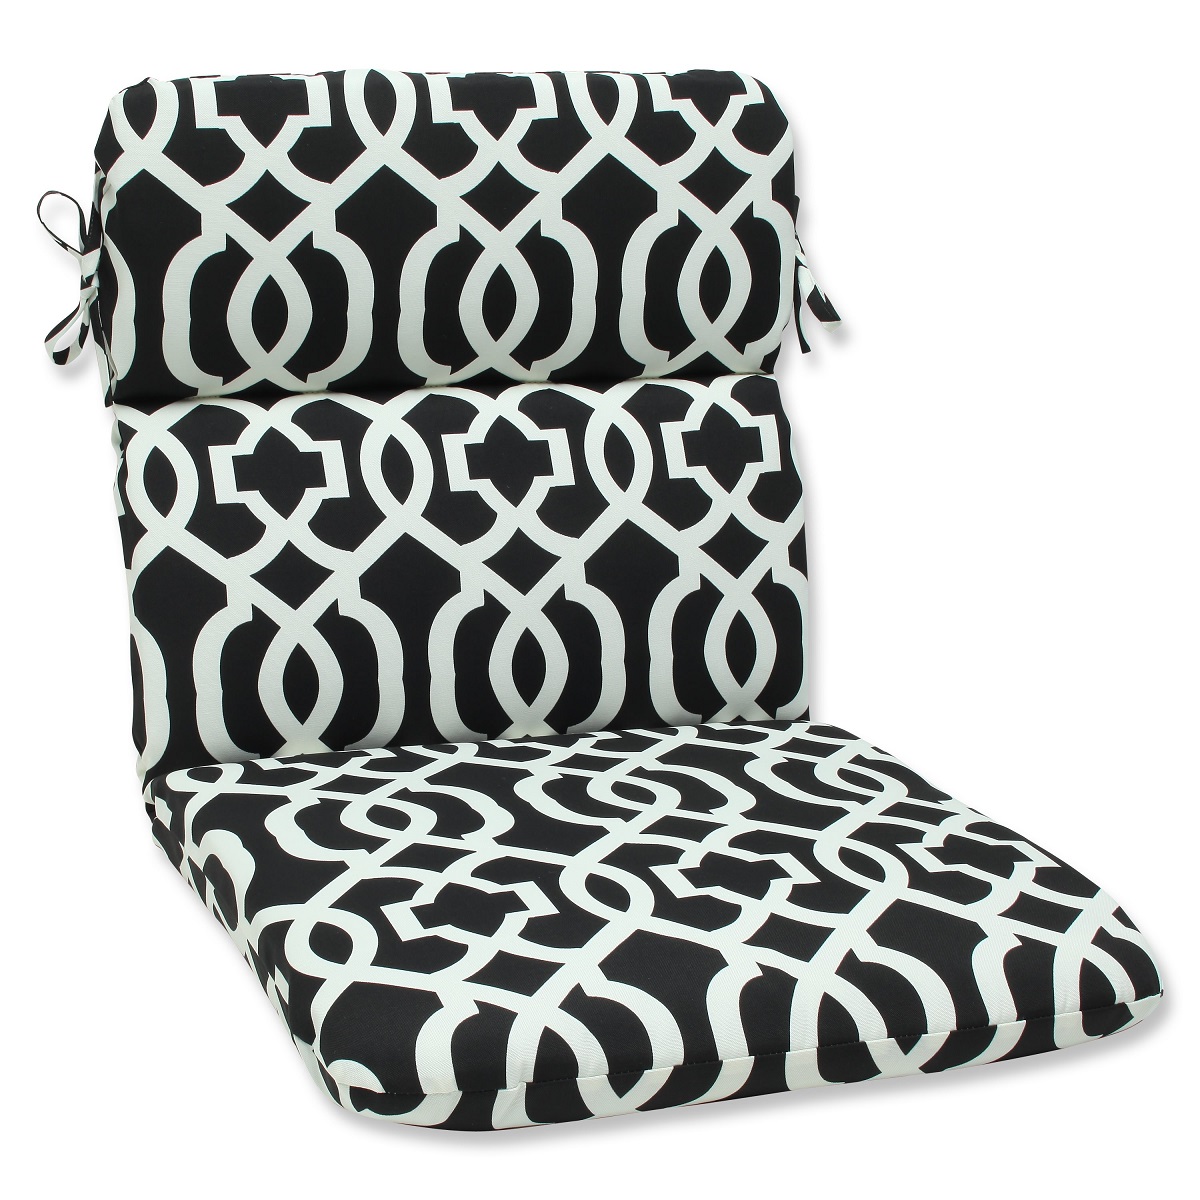 Pillow Perfect 40.5" Black and White Geometric Outdoor Patio Rounded Chair Cushion